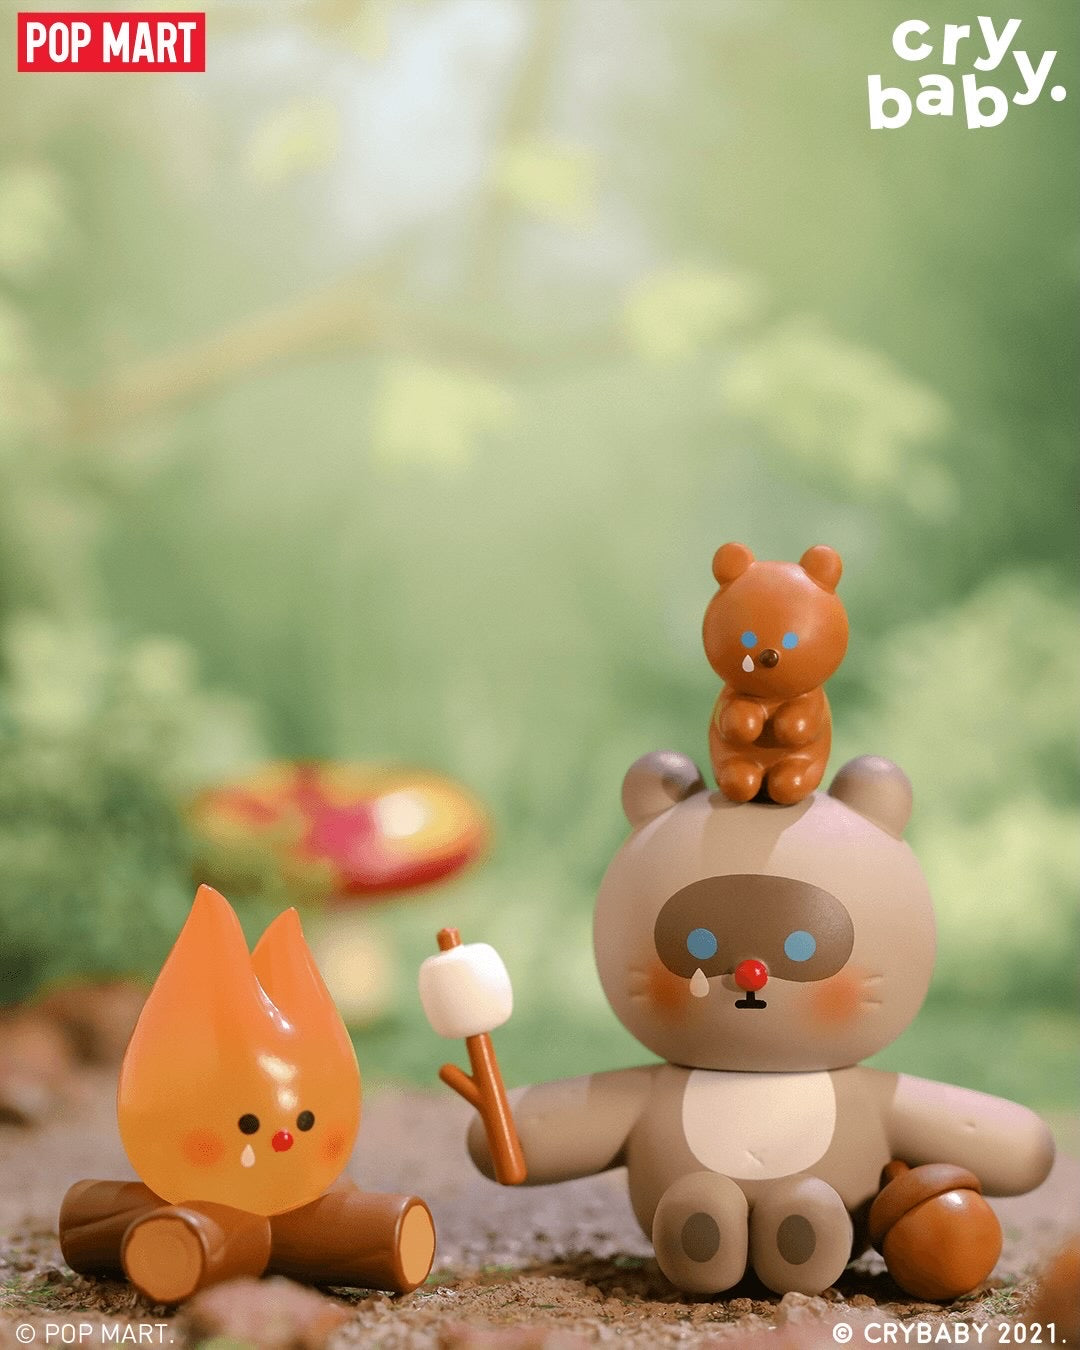 POP MART Crybaby Crying In The Woods Series – ActionCity